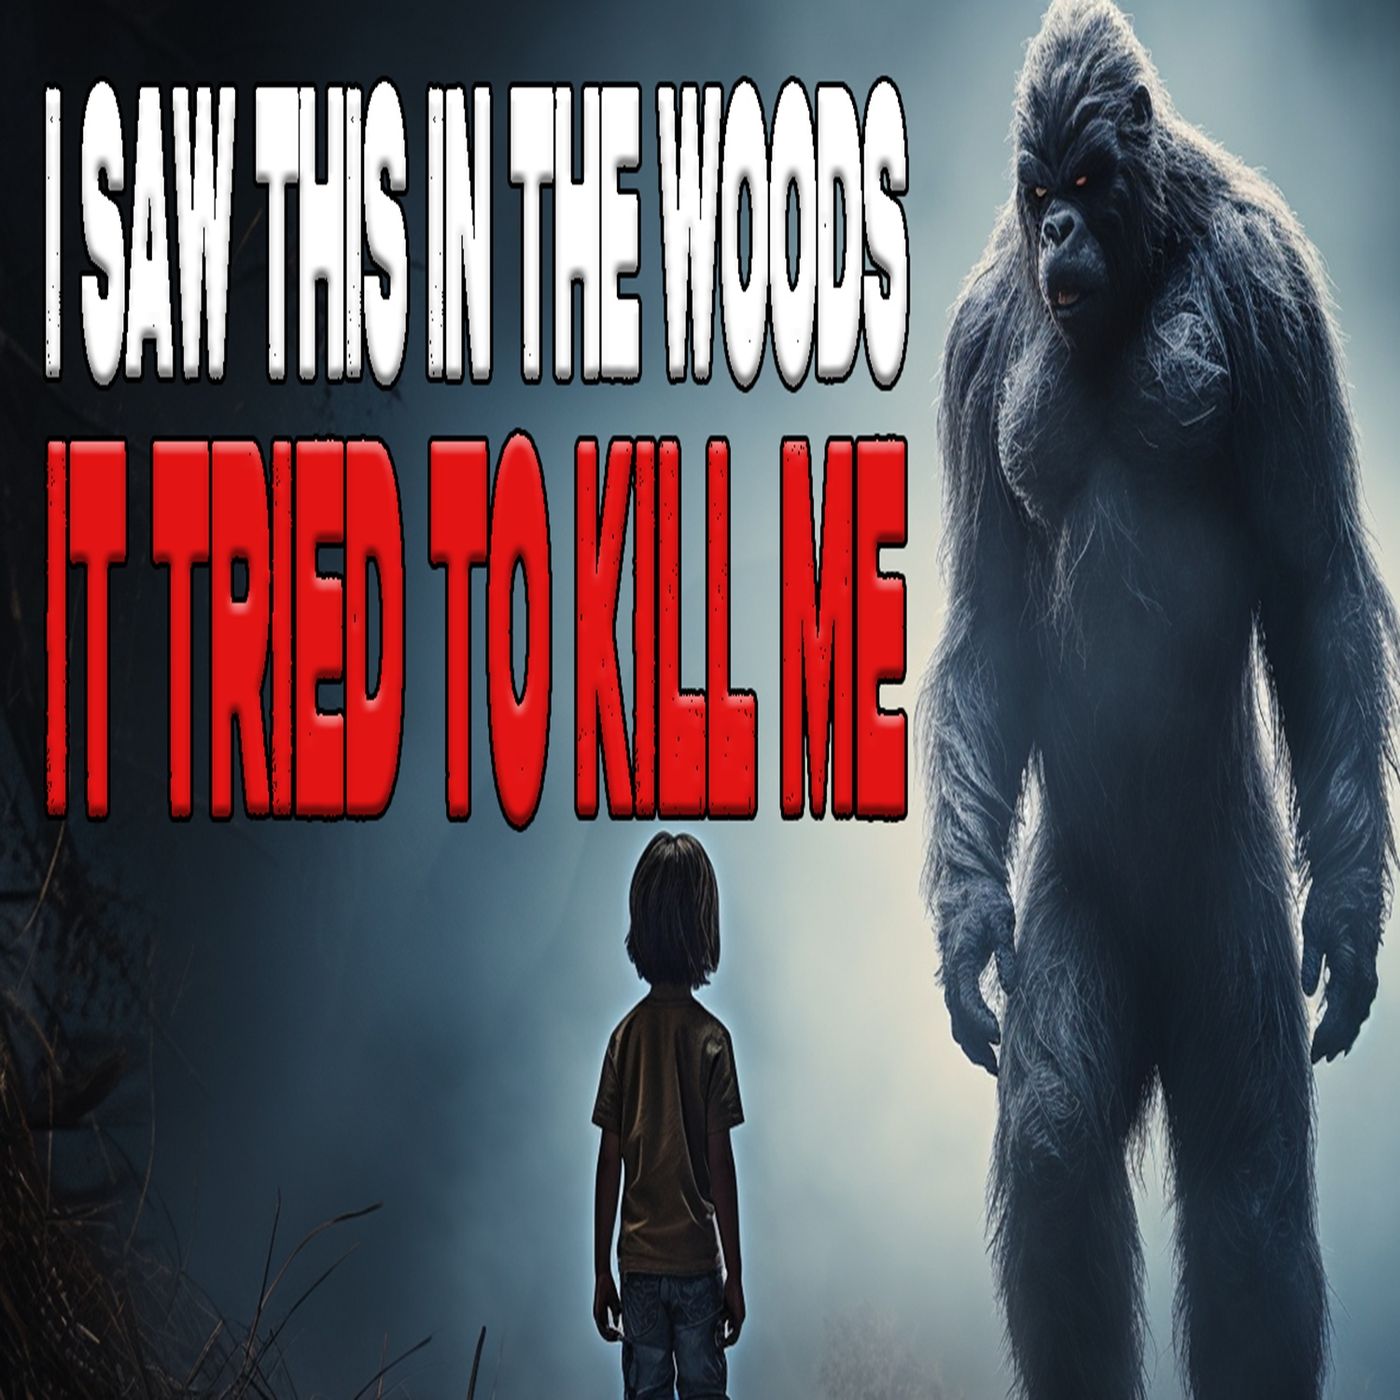 The Bigfoot That Tried to Kill Me